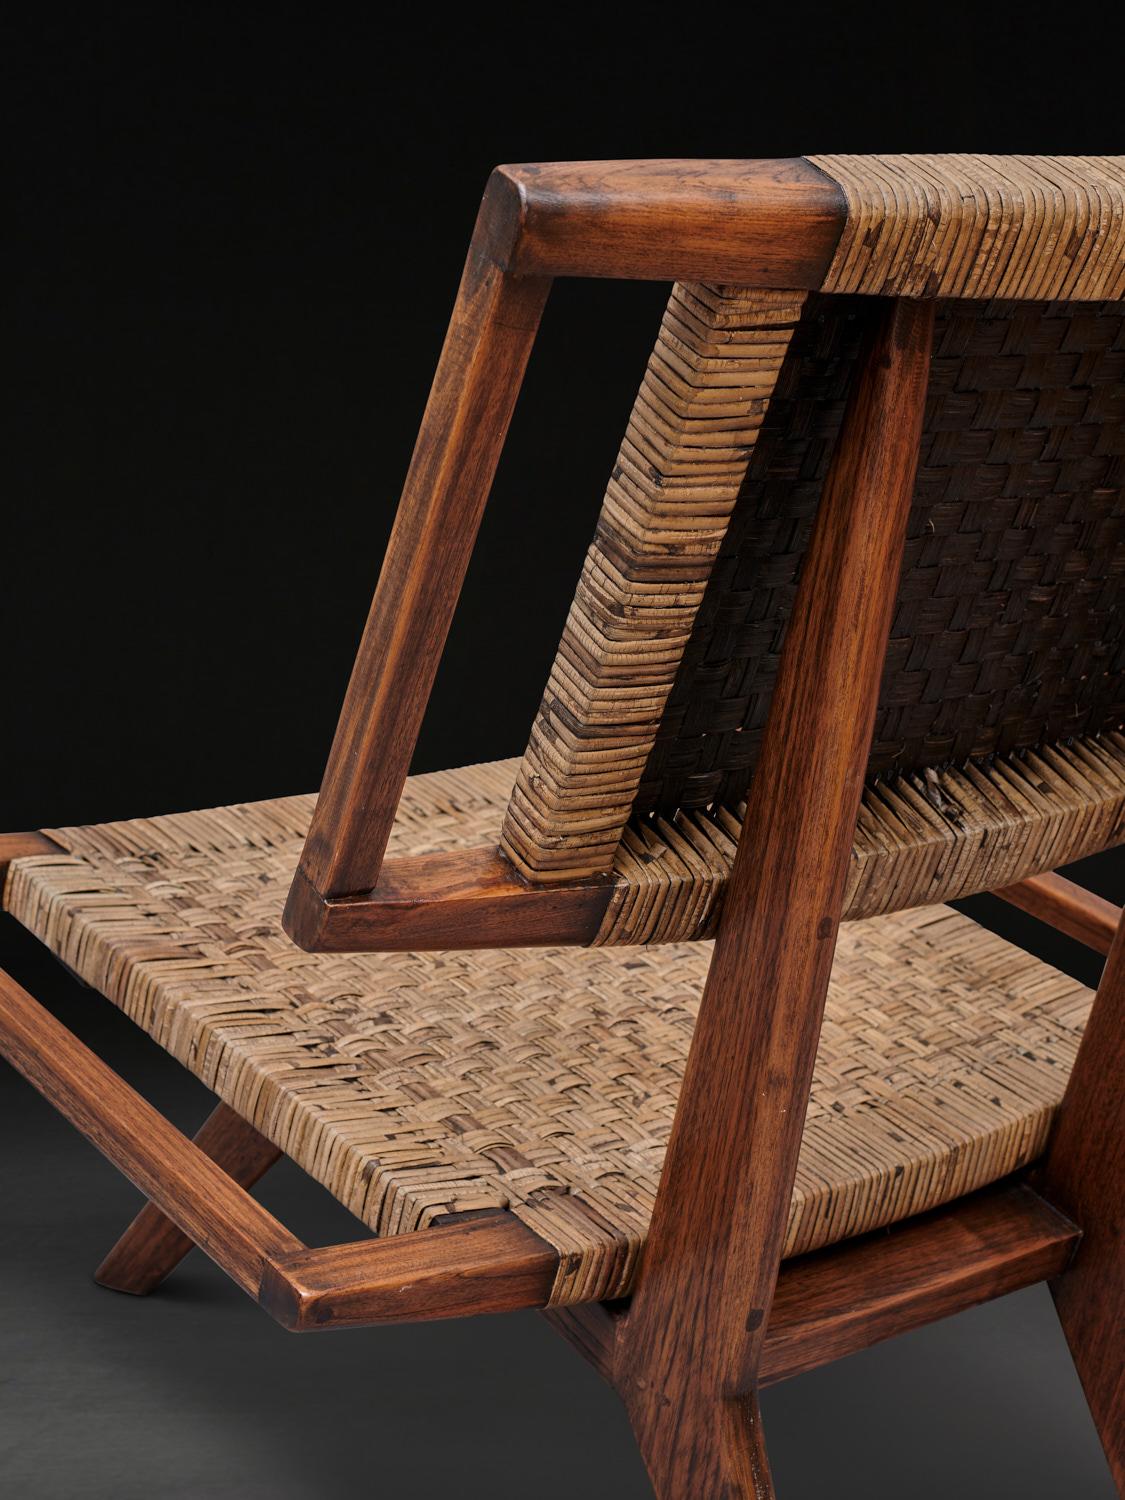 Mid-20th Century Mid Century Rattan Lounge chairs attr. to Paul László for Glenn of California